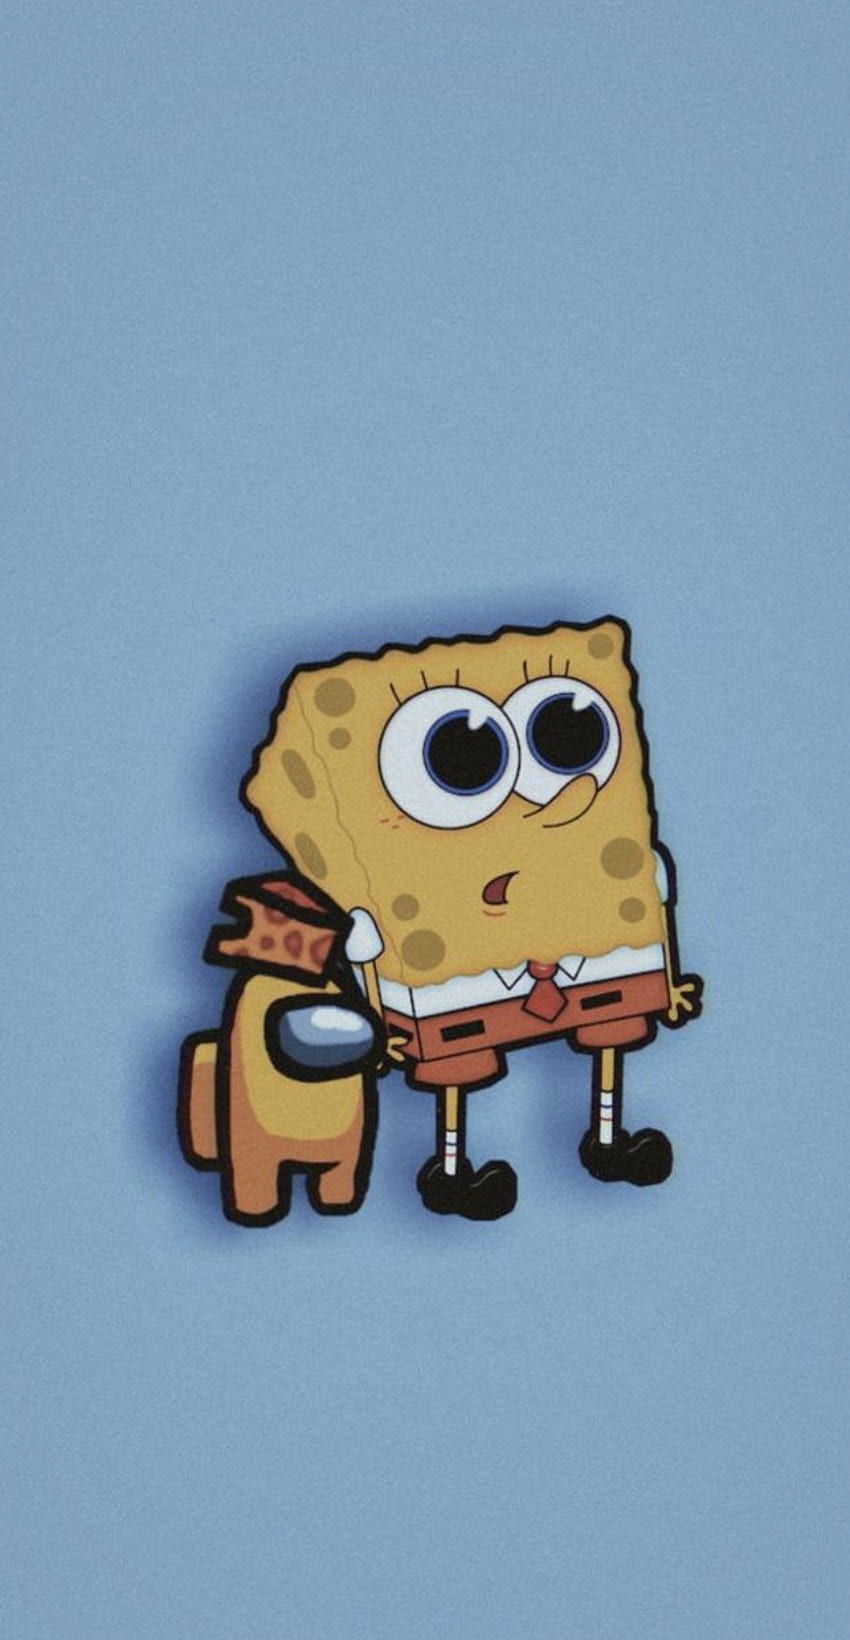 81 Spongebob aesthetic pictures and wallpapers ideas  spongebob spongebob  wallpaper cartoon wallpaper